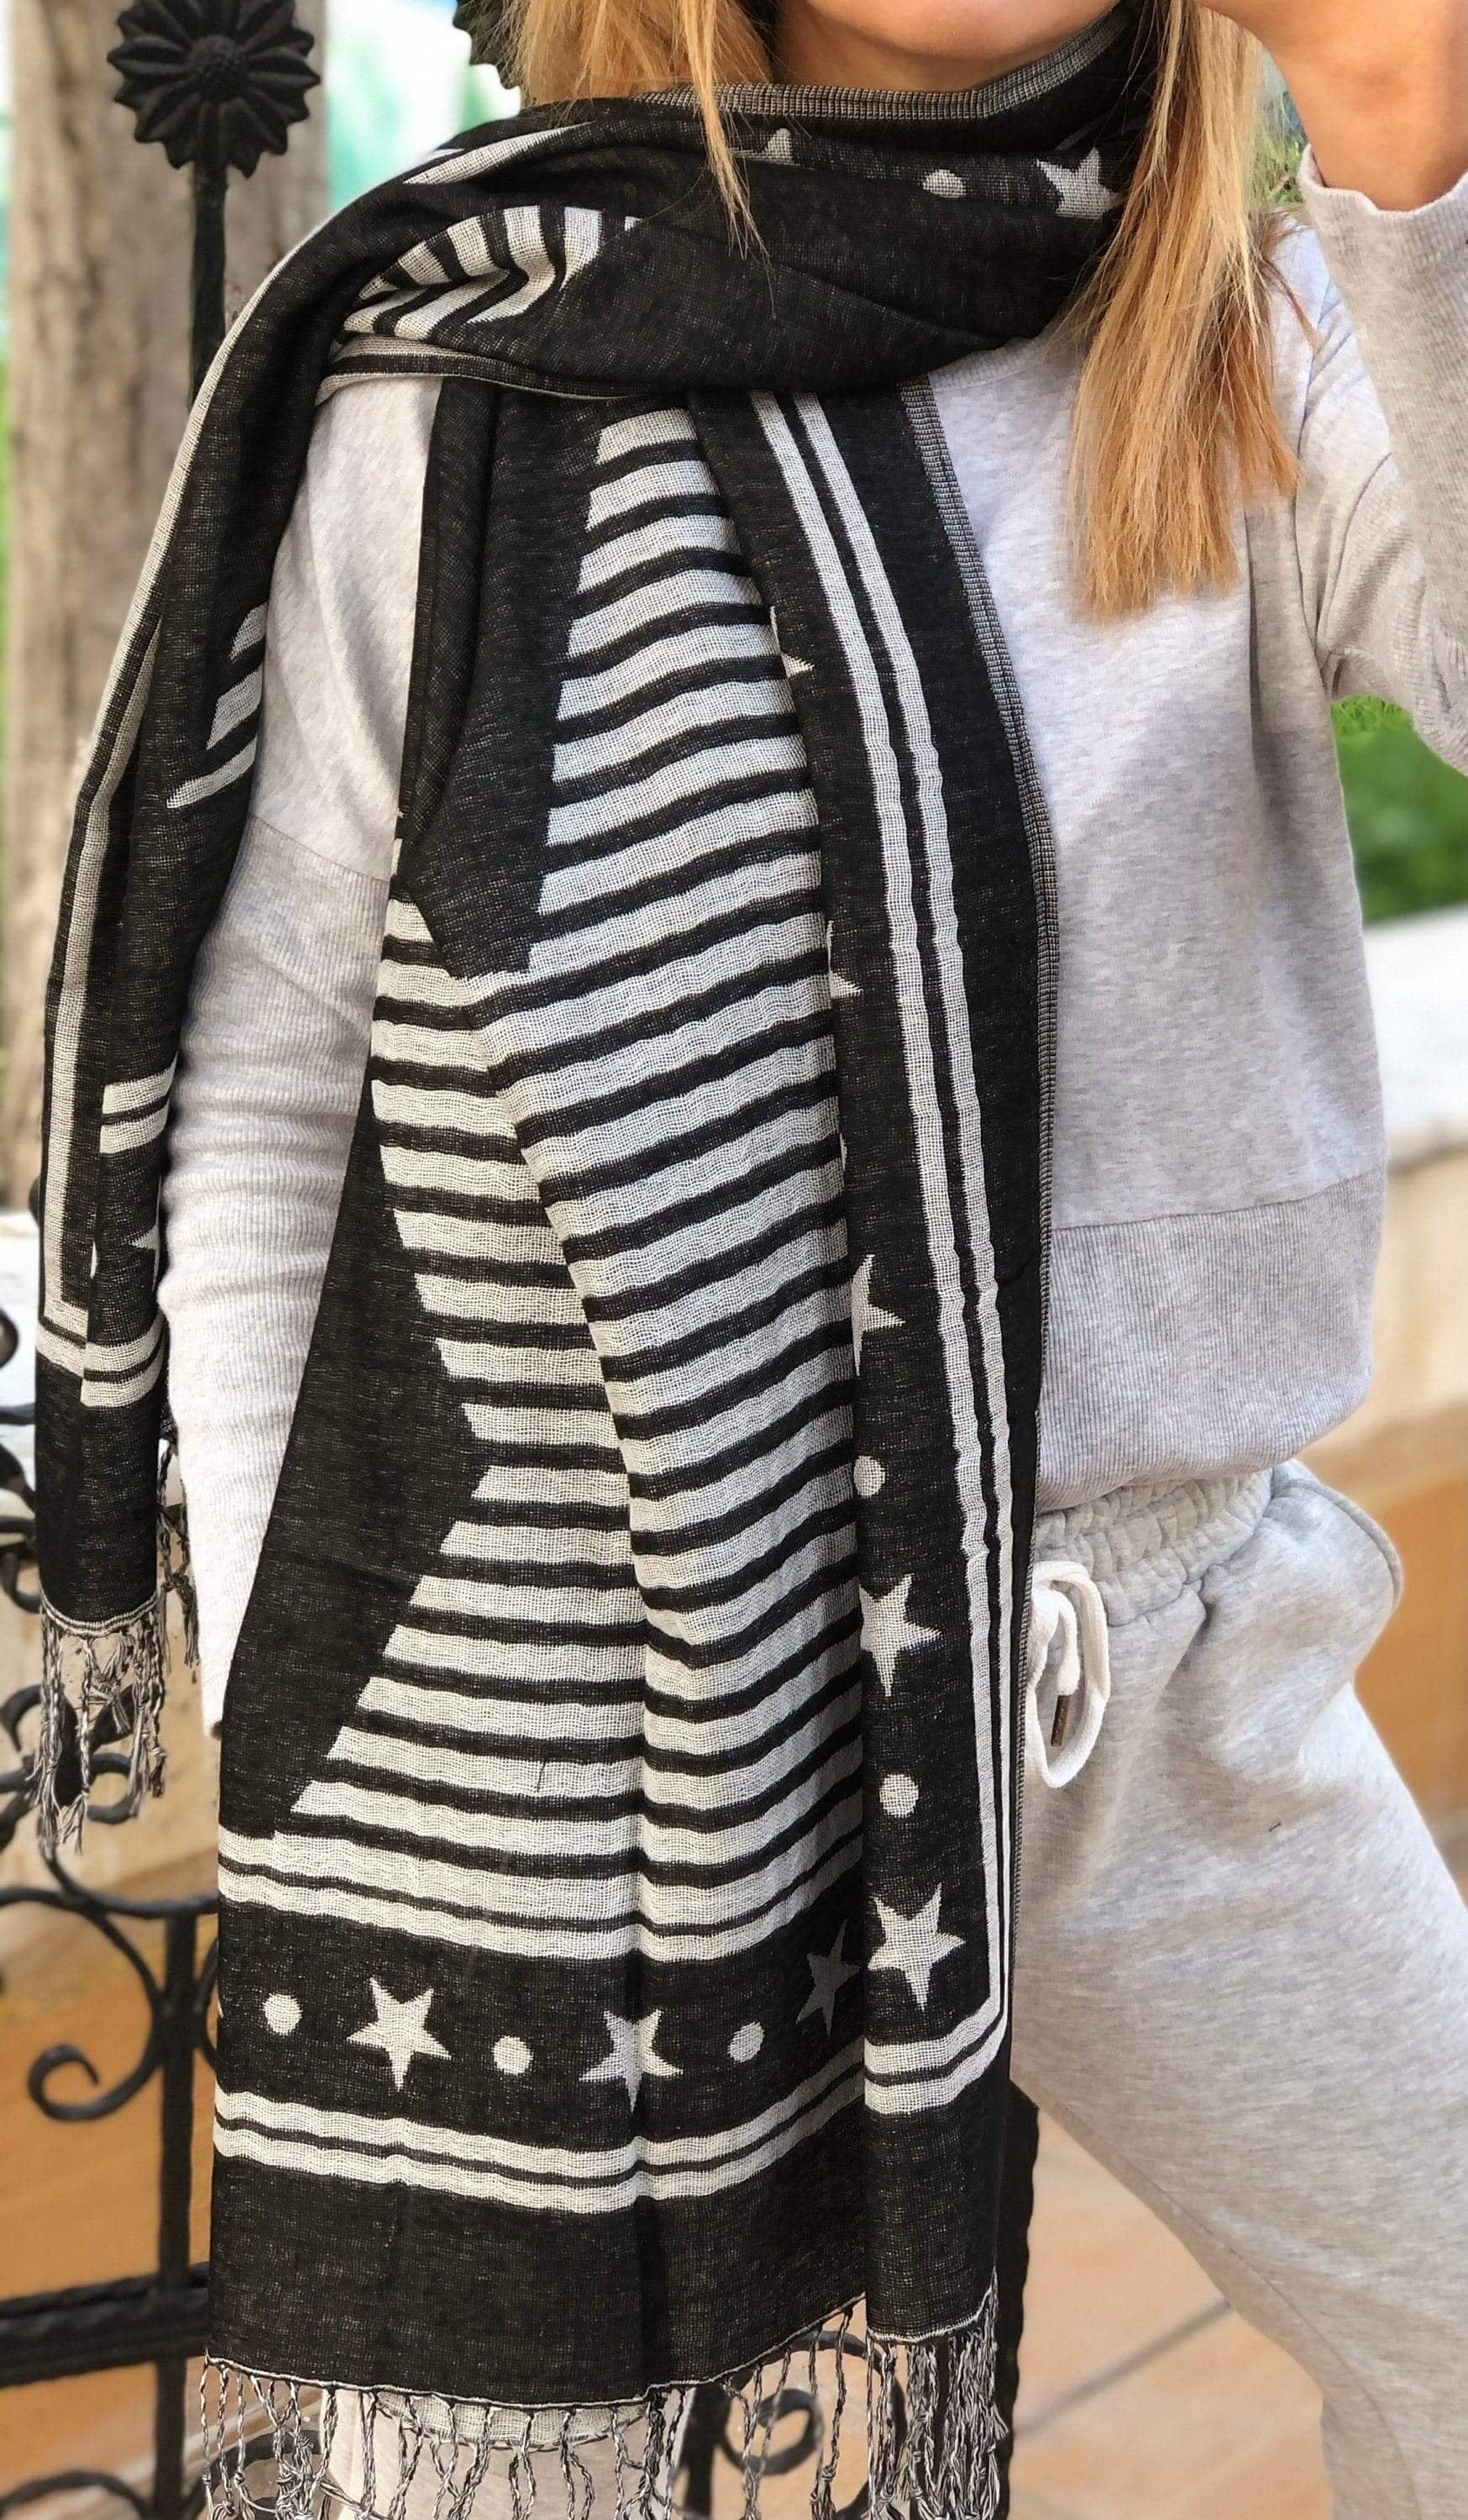 Starry Night Cotton Scarf: A beautiful cotton scarf featuring a starry night pattern in shades of black and white. Perfect for adding a touch of glamour and sophistication to any outfit.